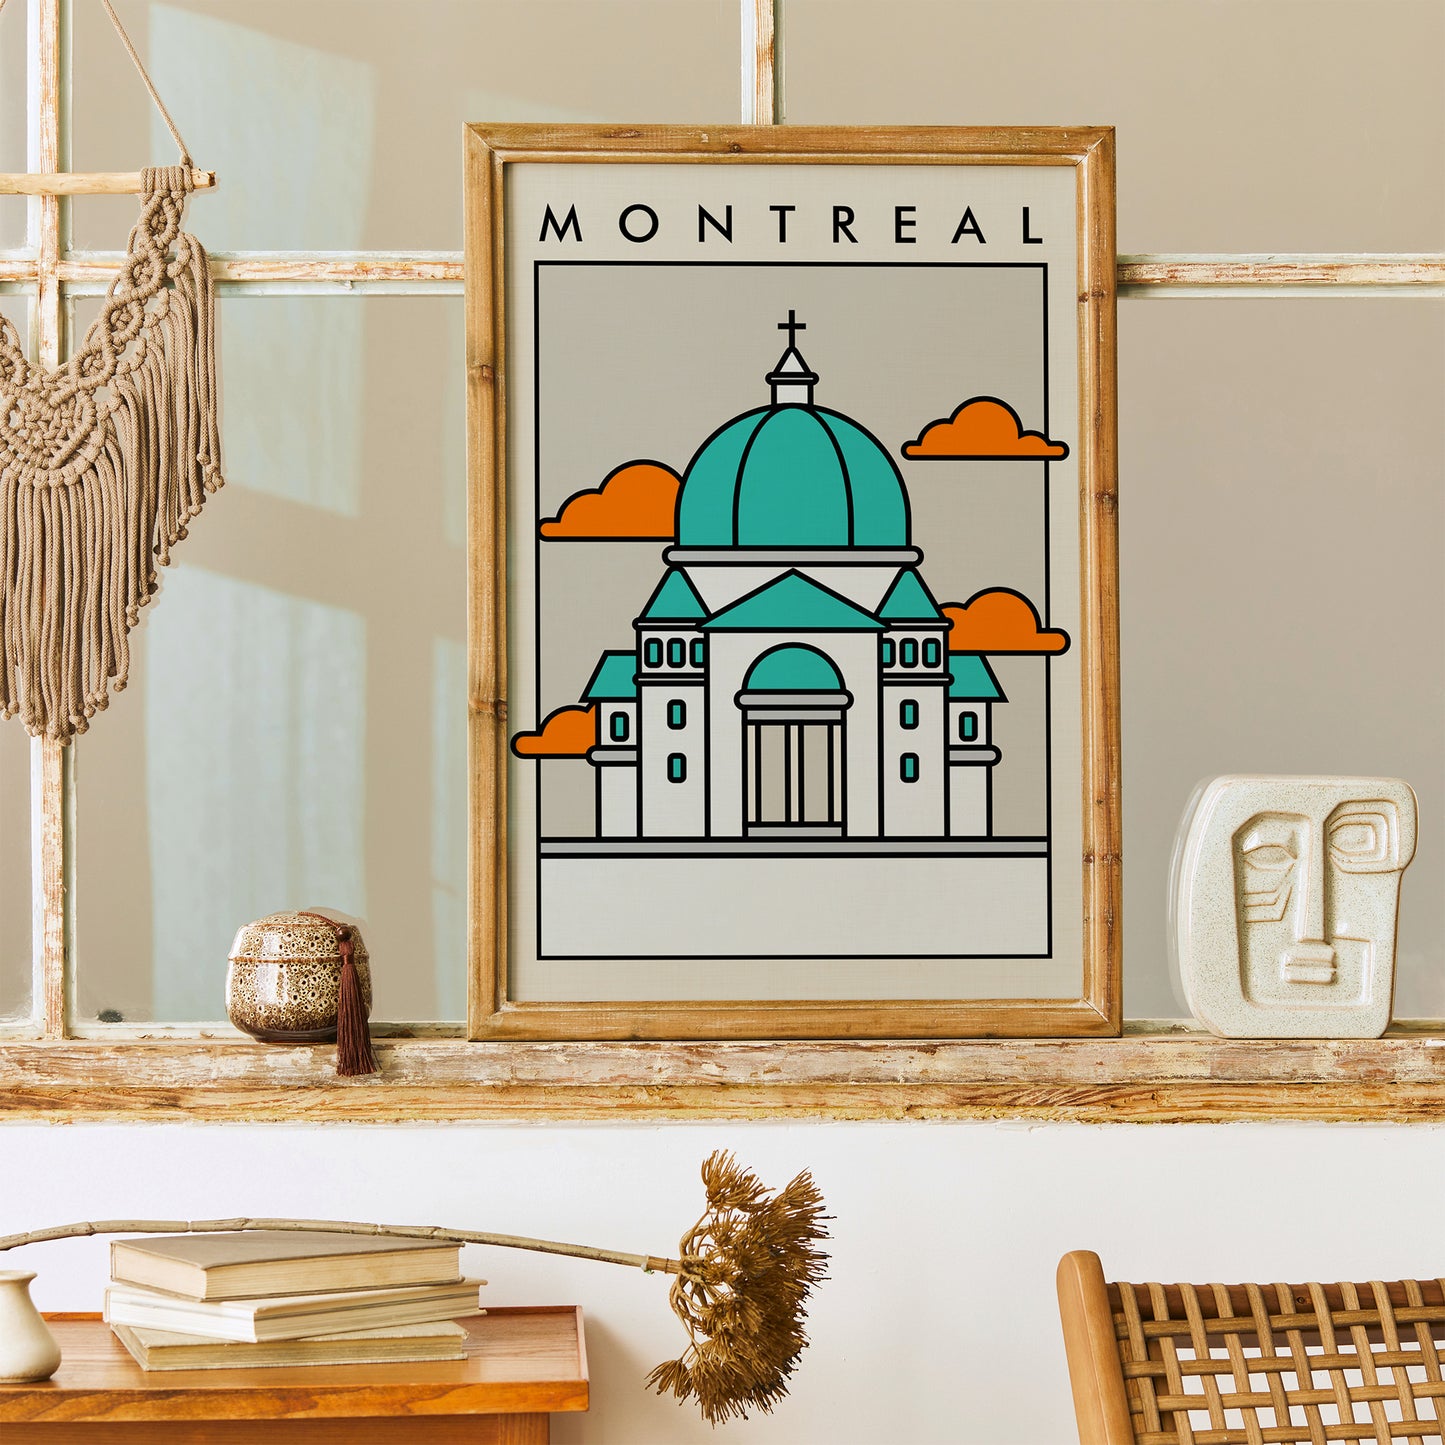 Montreal City. Travel Poster